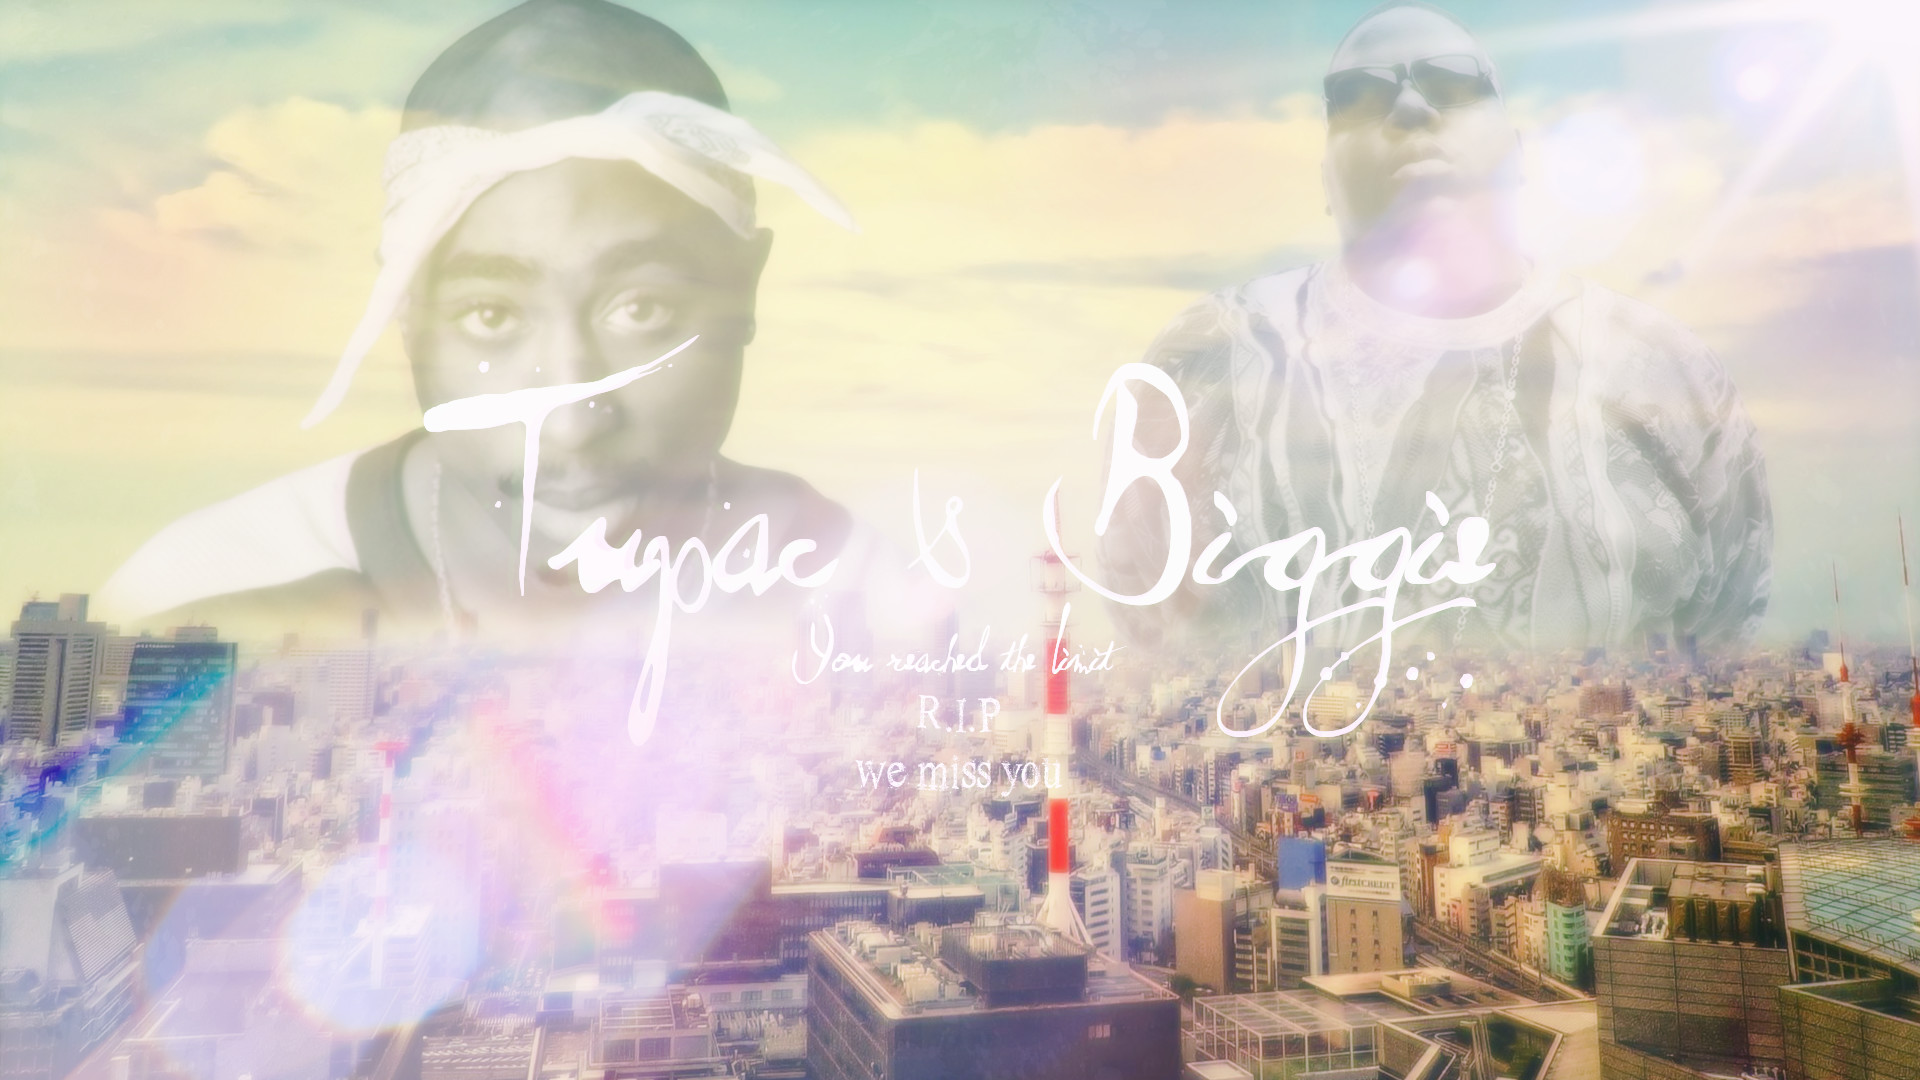 1920x1080 Tupac and Biggie wallpaper by IndicaDesigns Tupac and Biggie wallpaper by  IndicaDesigns